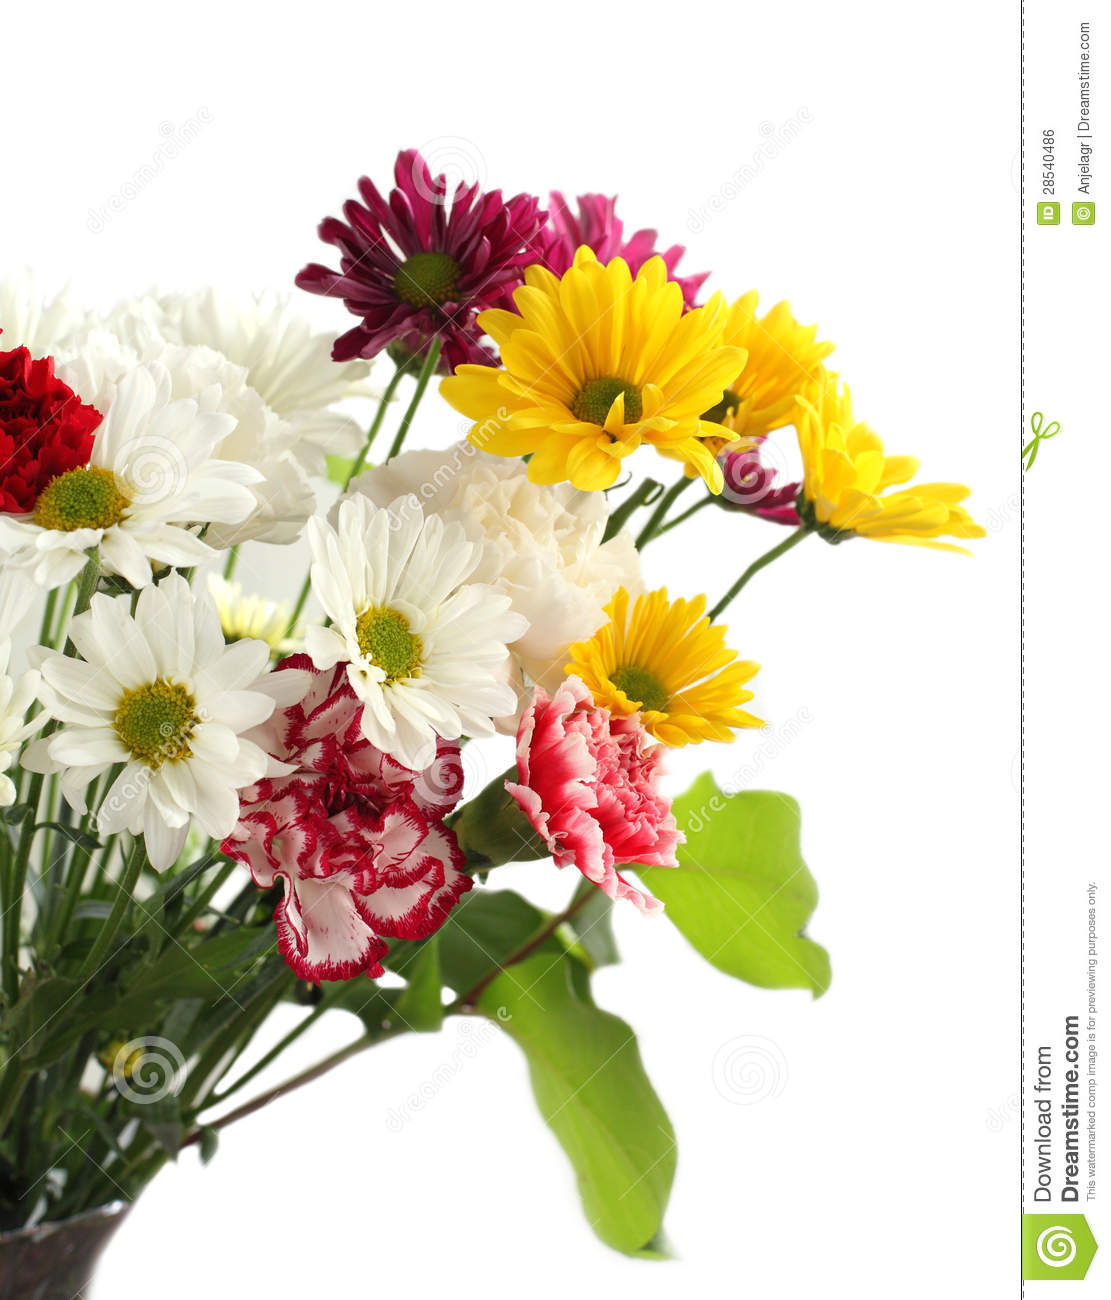 Colorful Flower Bouquet Royalty Free Stock Image   Image  28540486